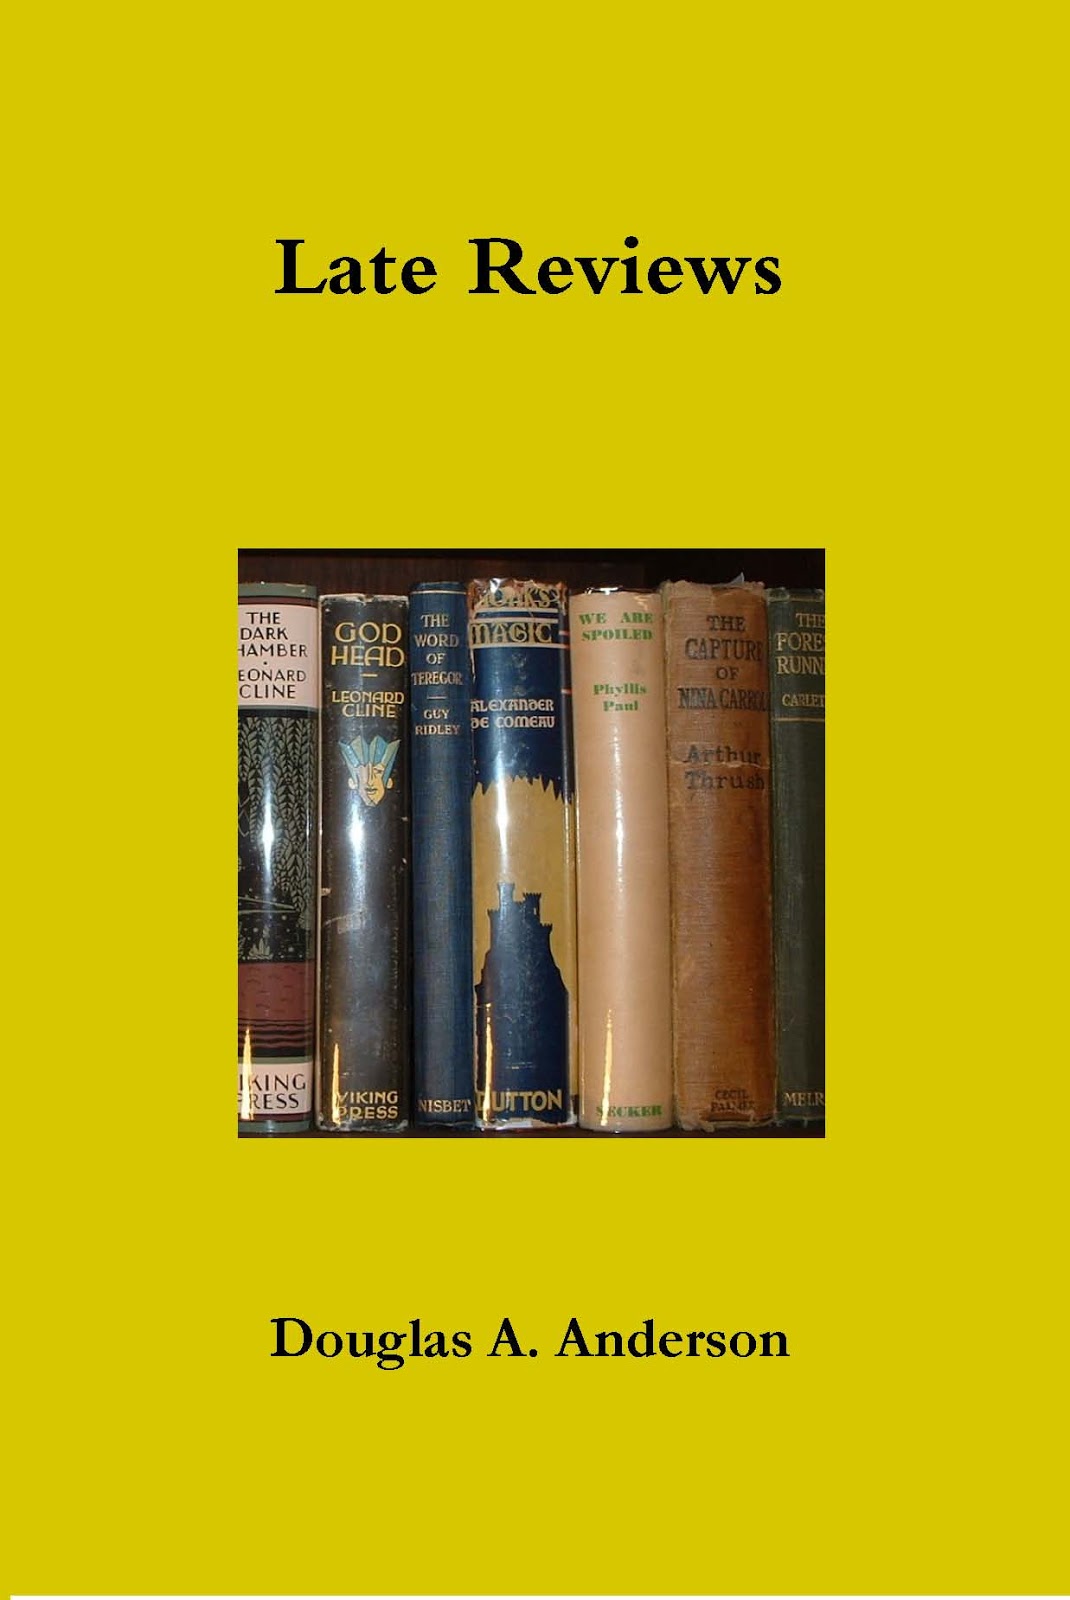 Late Reviews front cover.jpg